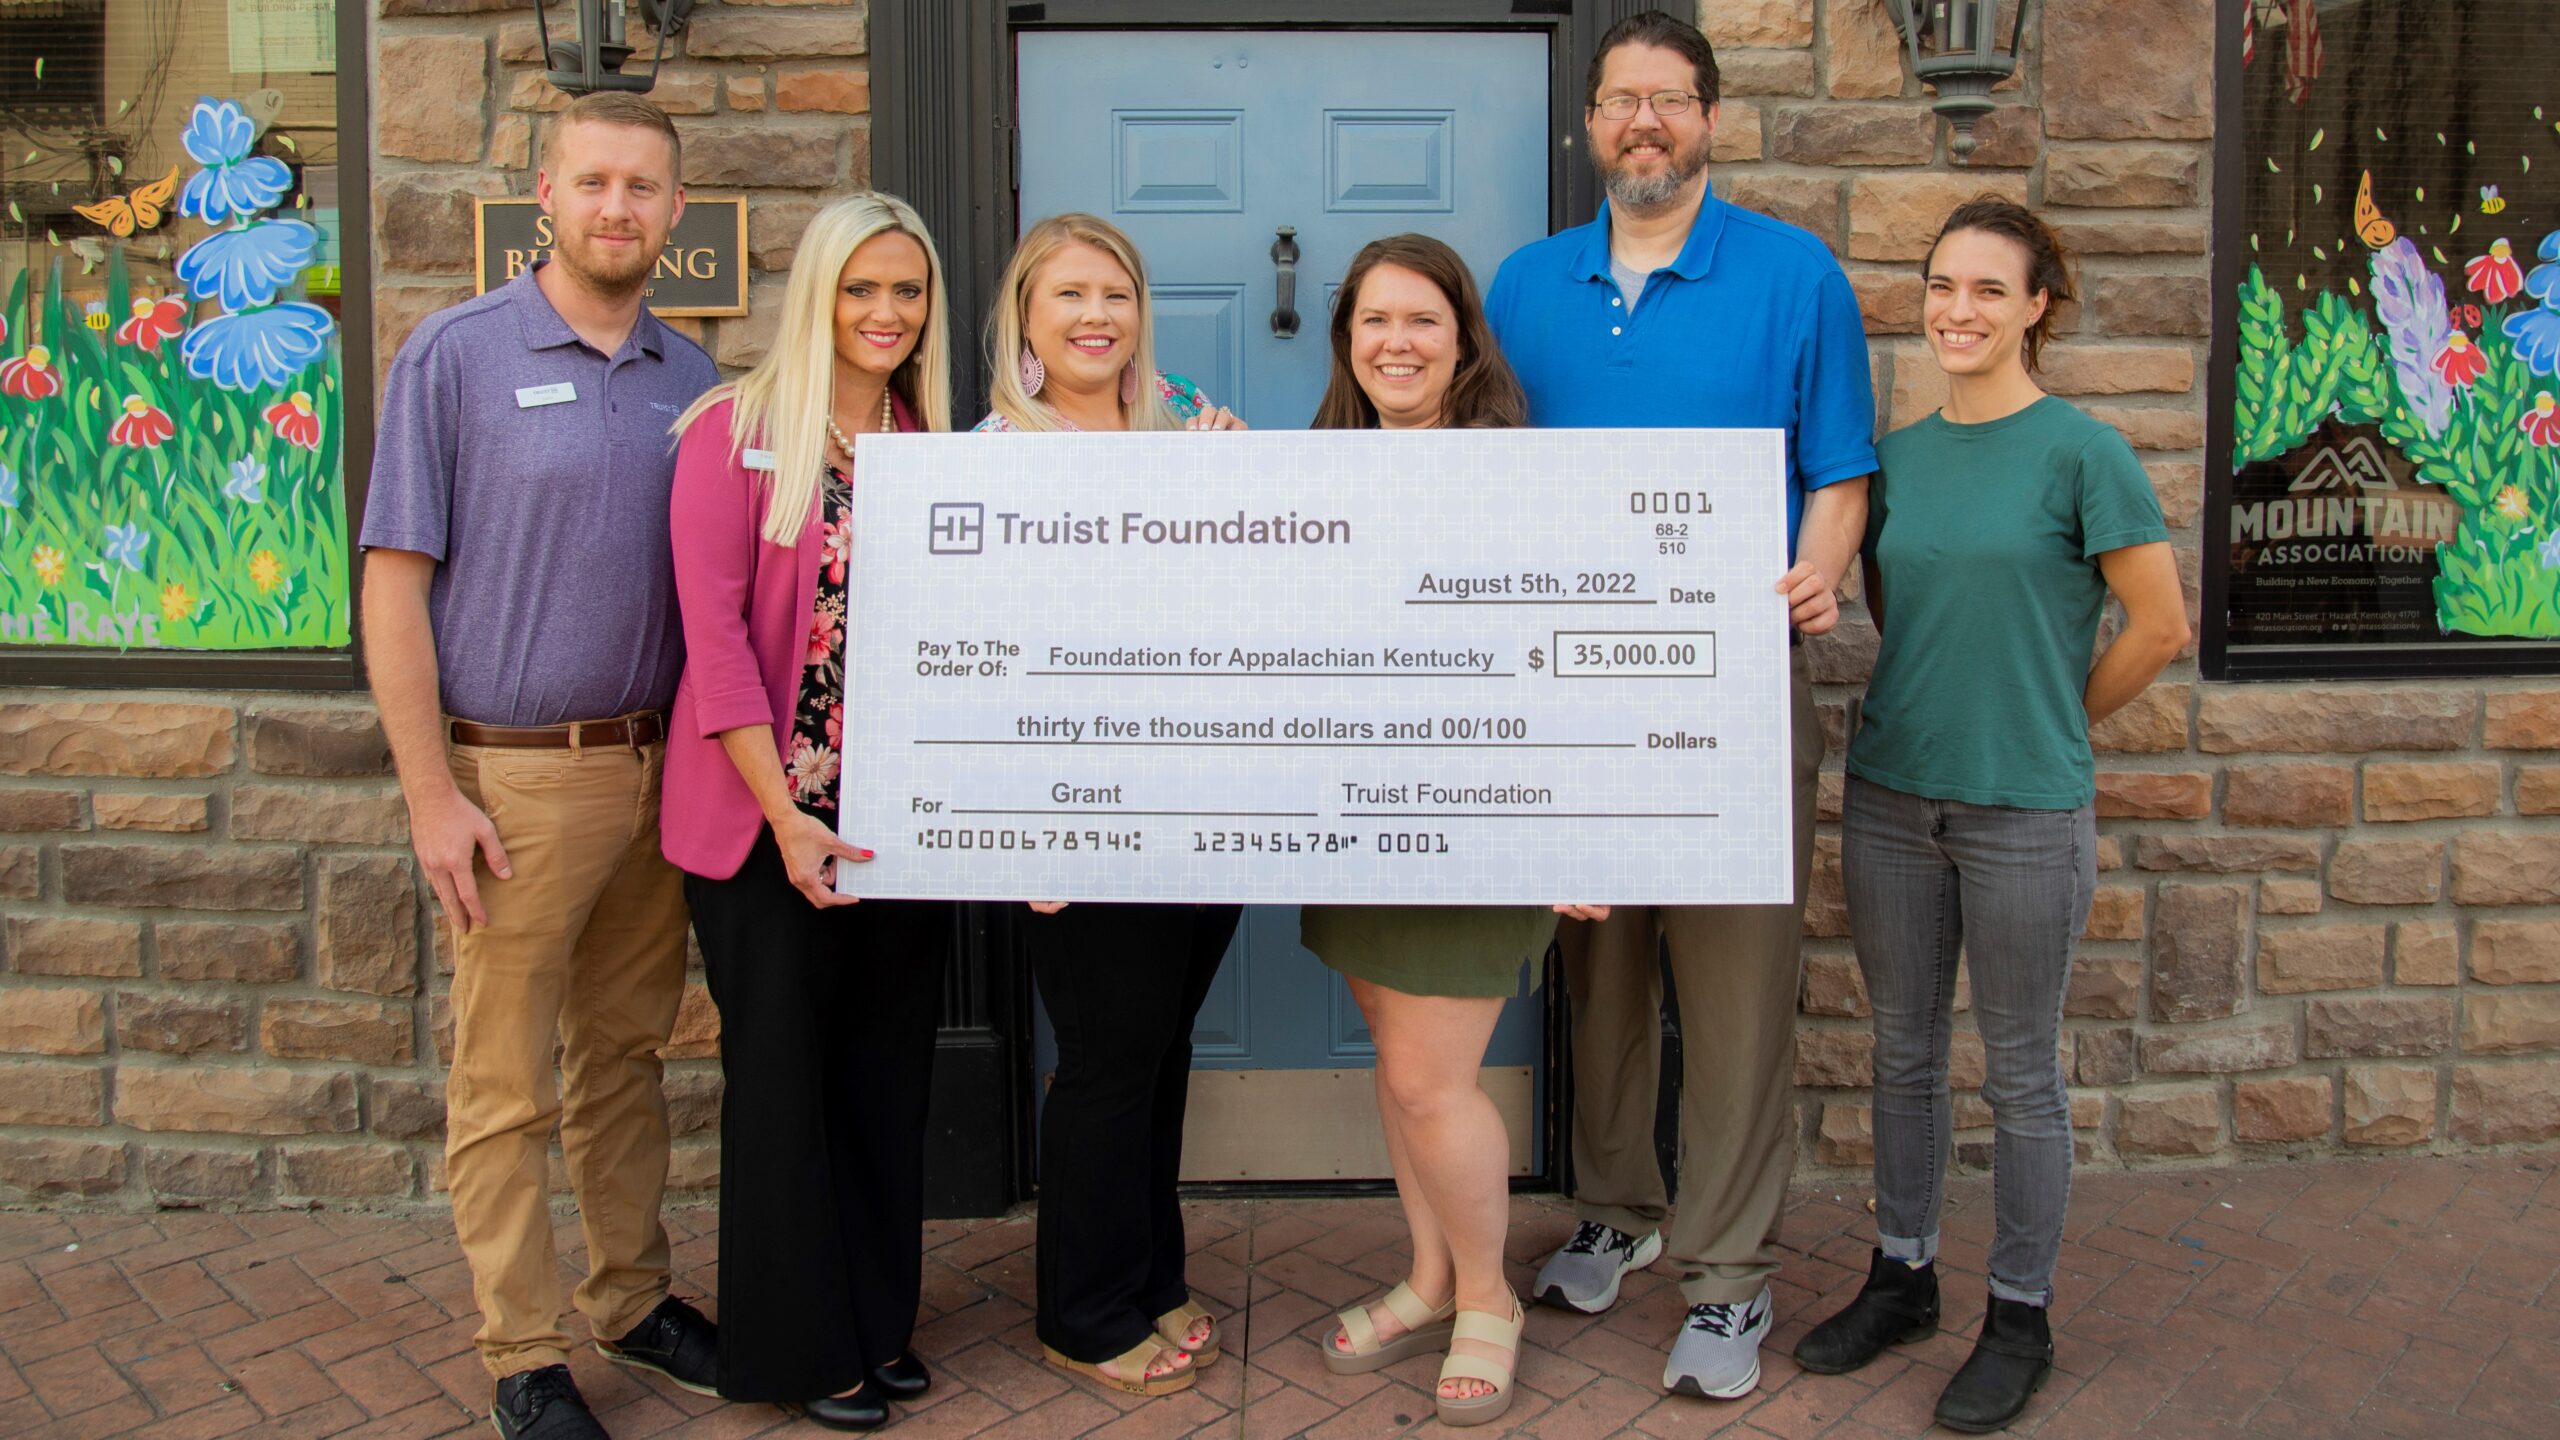 Truist Foundation awards $35,000 for flood relief